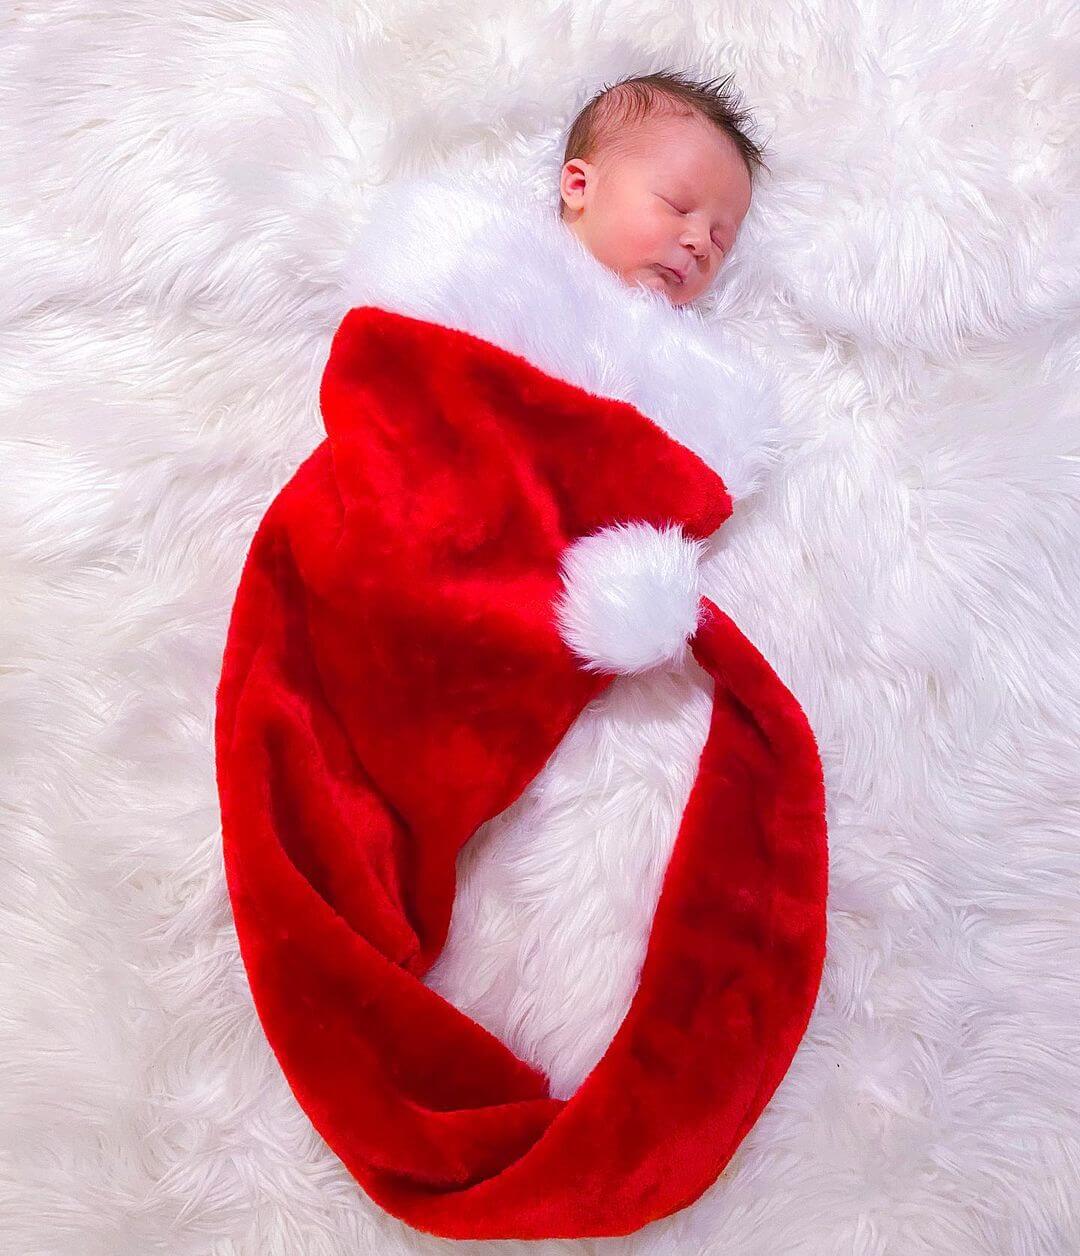 Christmas Photoshoot Ideas for Your Baby Wrap Your Baby Around The Red Santa Hat